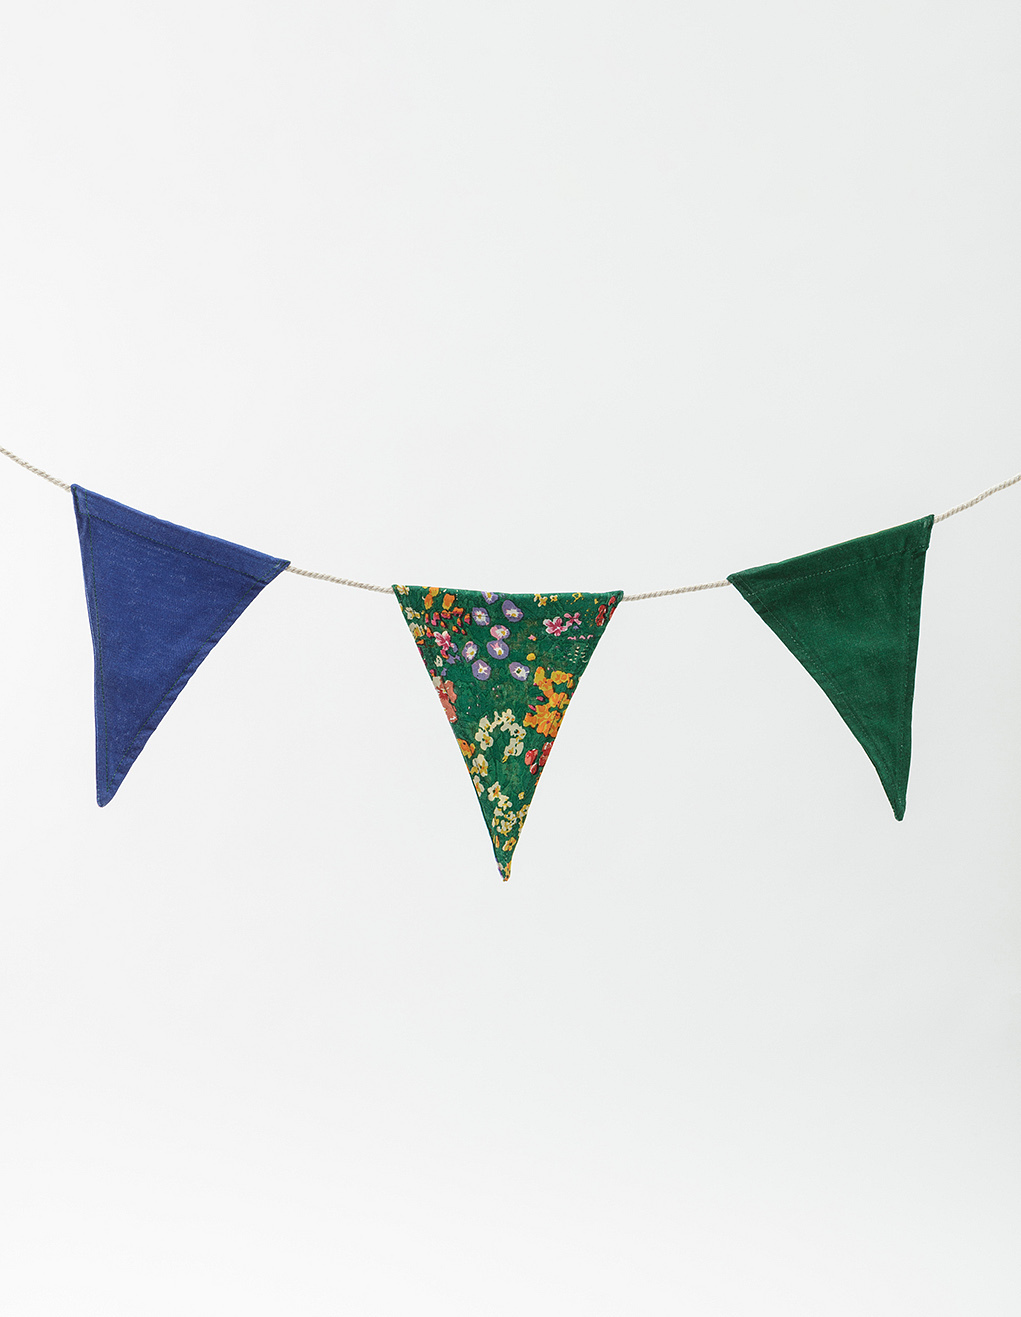 Floral cotton bunting